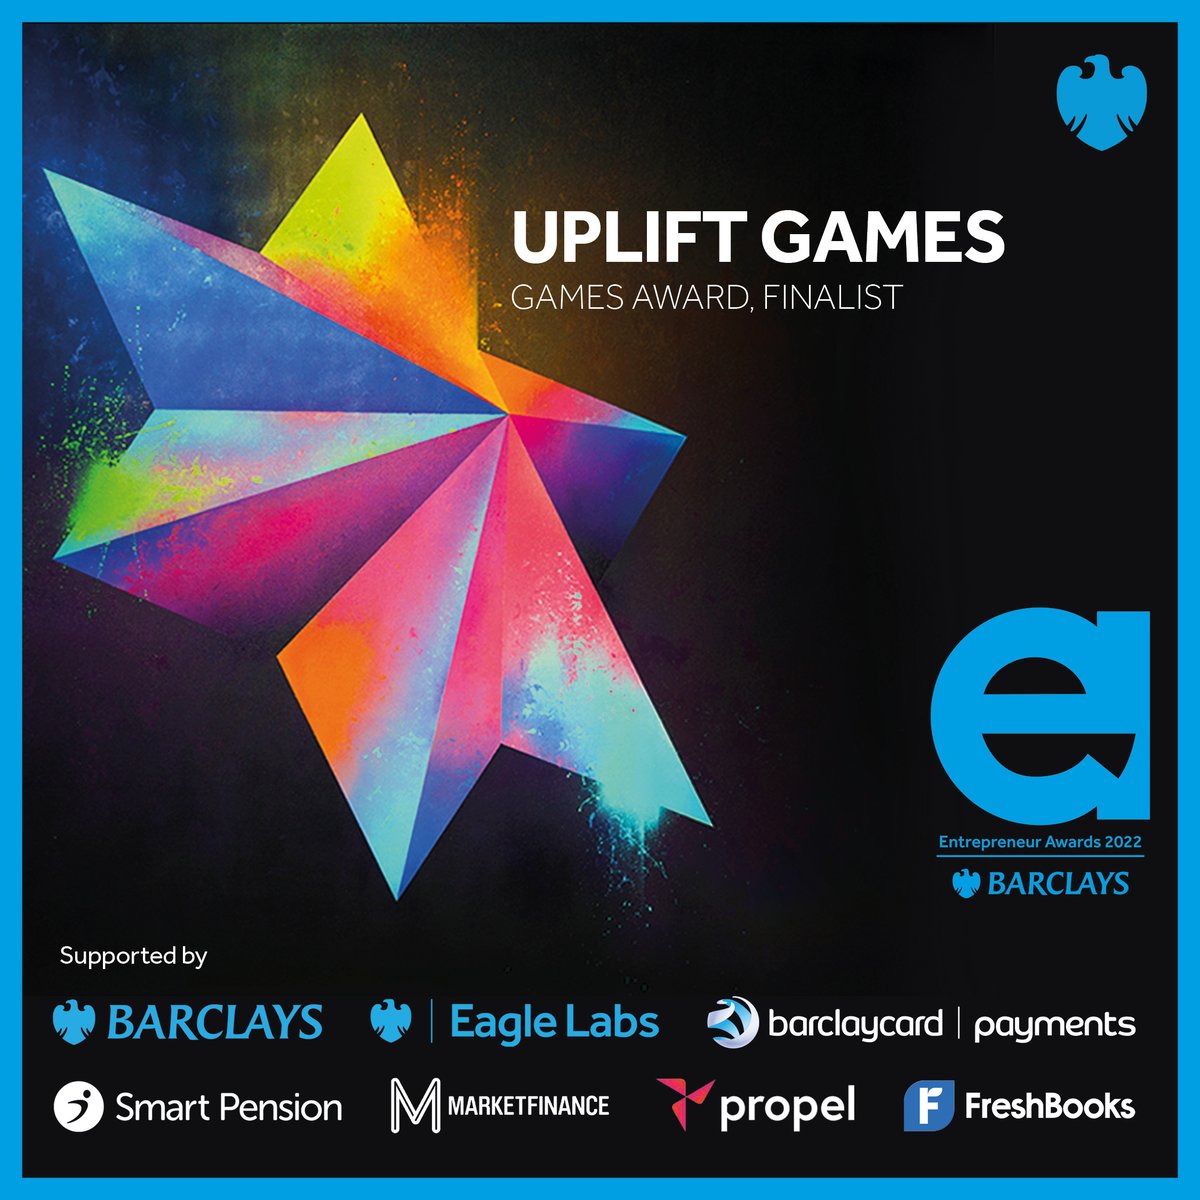 Barclays Entrepreneur Awards 2022 voting closes next week! Please vote for Uplift Games to win the People's Choice Award: events.barclays.com/esurvey/index.… All that is required is an email and to select Uplift from the list Voting is open until 00:00 30 Sept. Thanks for your support!